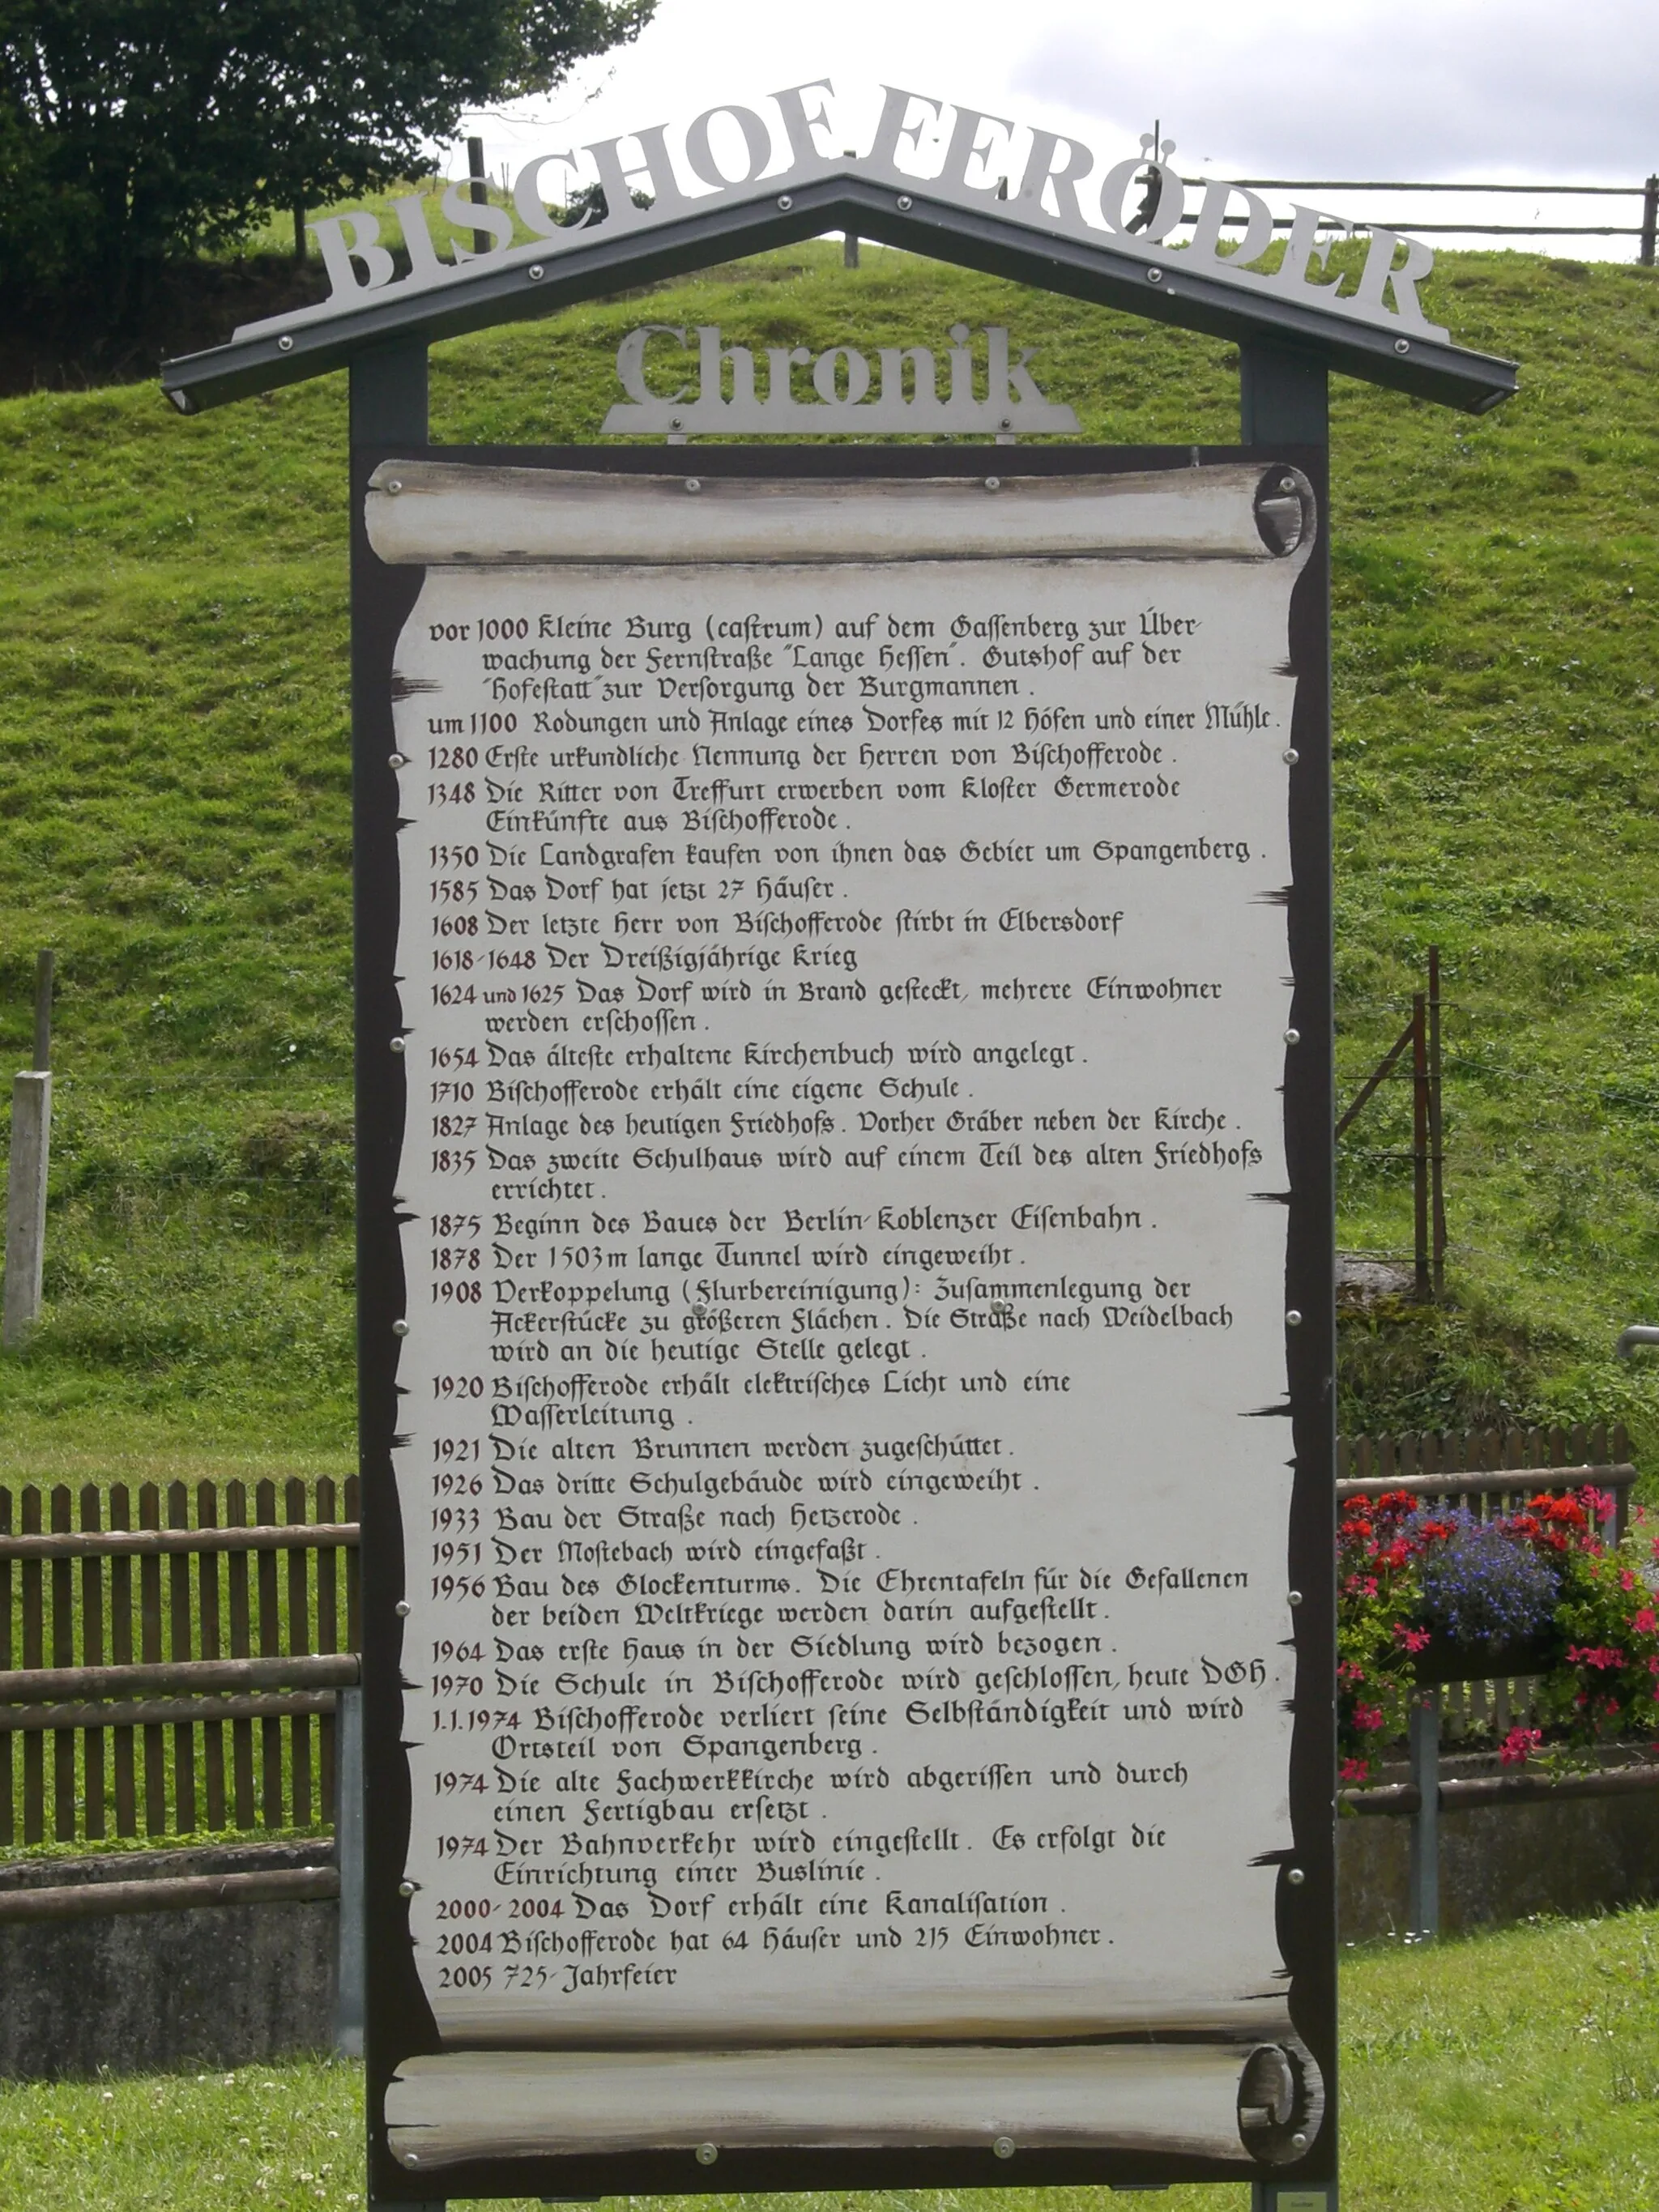 Photo showing: Board displaying the history of Bischofferode in Spangenberg-Bischofferode, Hesse, Germany (Text in German)